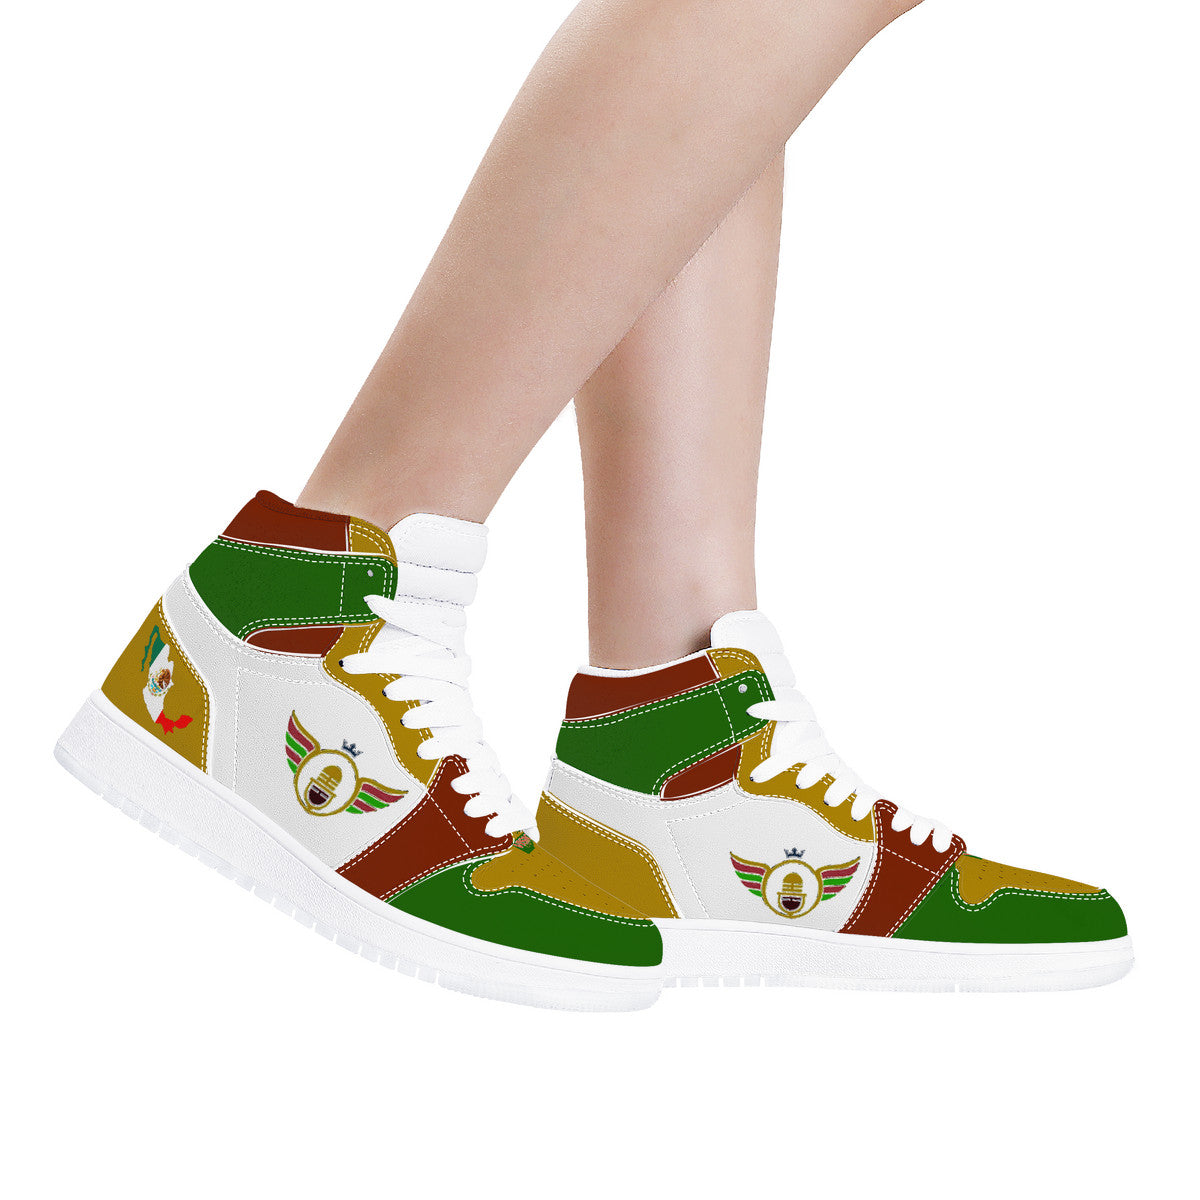 Gold Series - Green, Red and Gold | High Top Customized | Shoe Zero